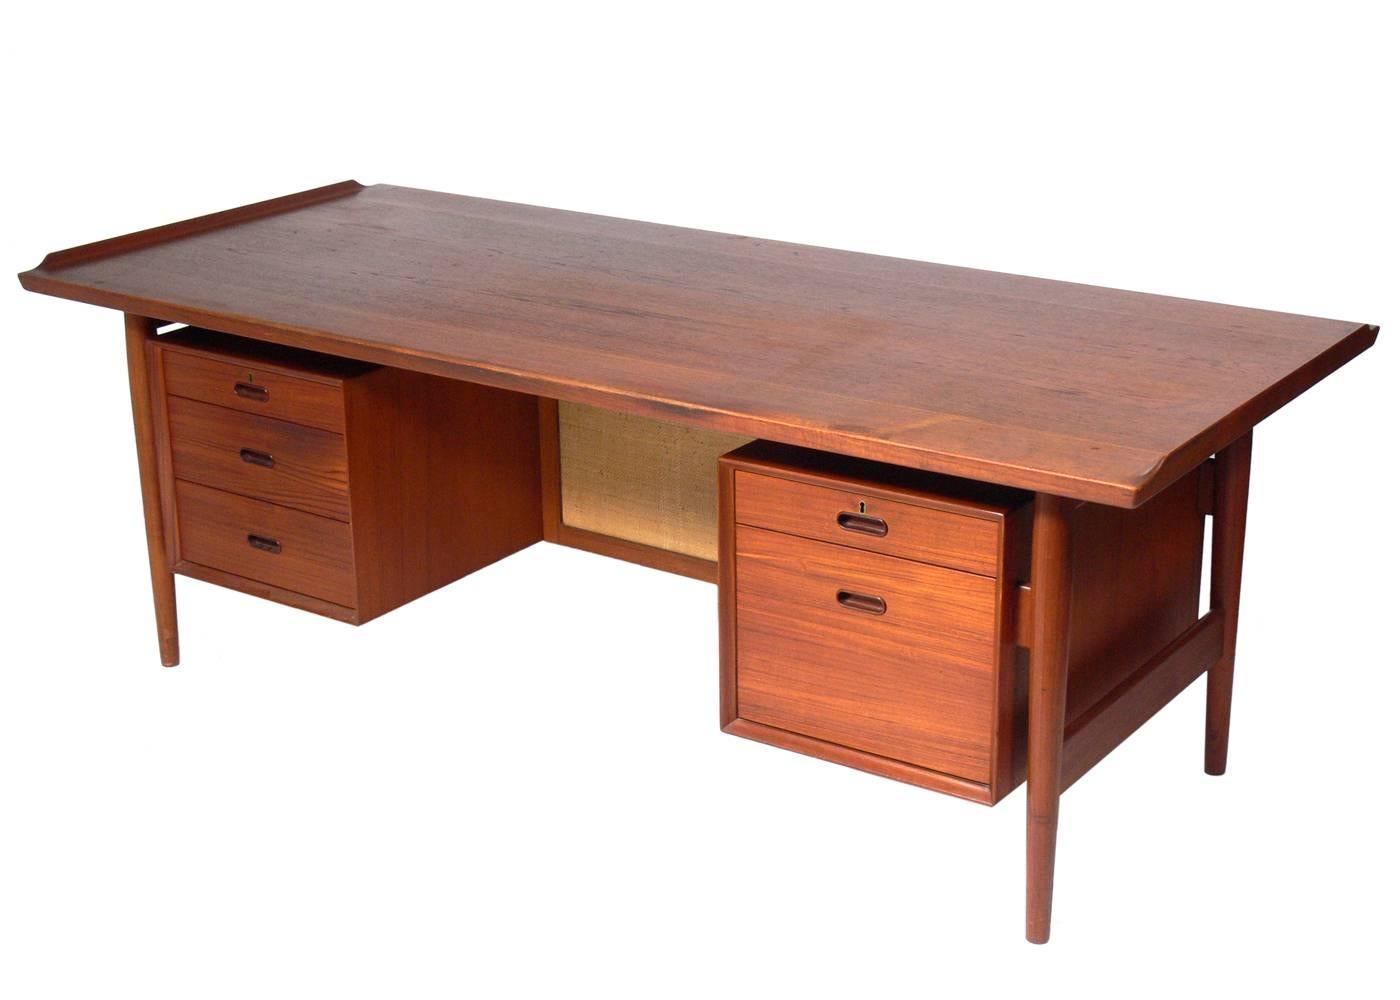 Danish Modern teak desk and chair, designed by Arne Vodder for Sibast, Denmark, circa 1960s. The desk is in very good condition. We are refinishing the top of the desk, and the base of the desk and the chair have been cleaned and teak oiled. The